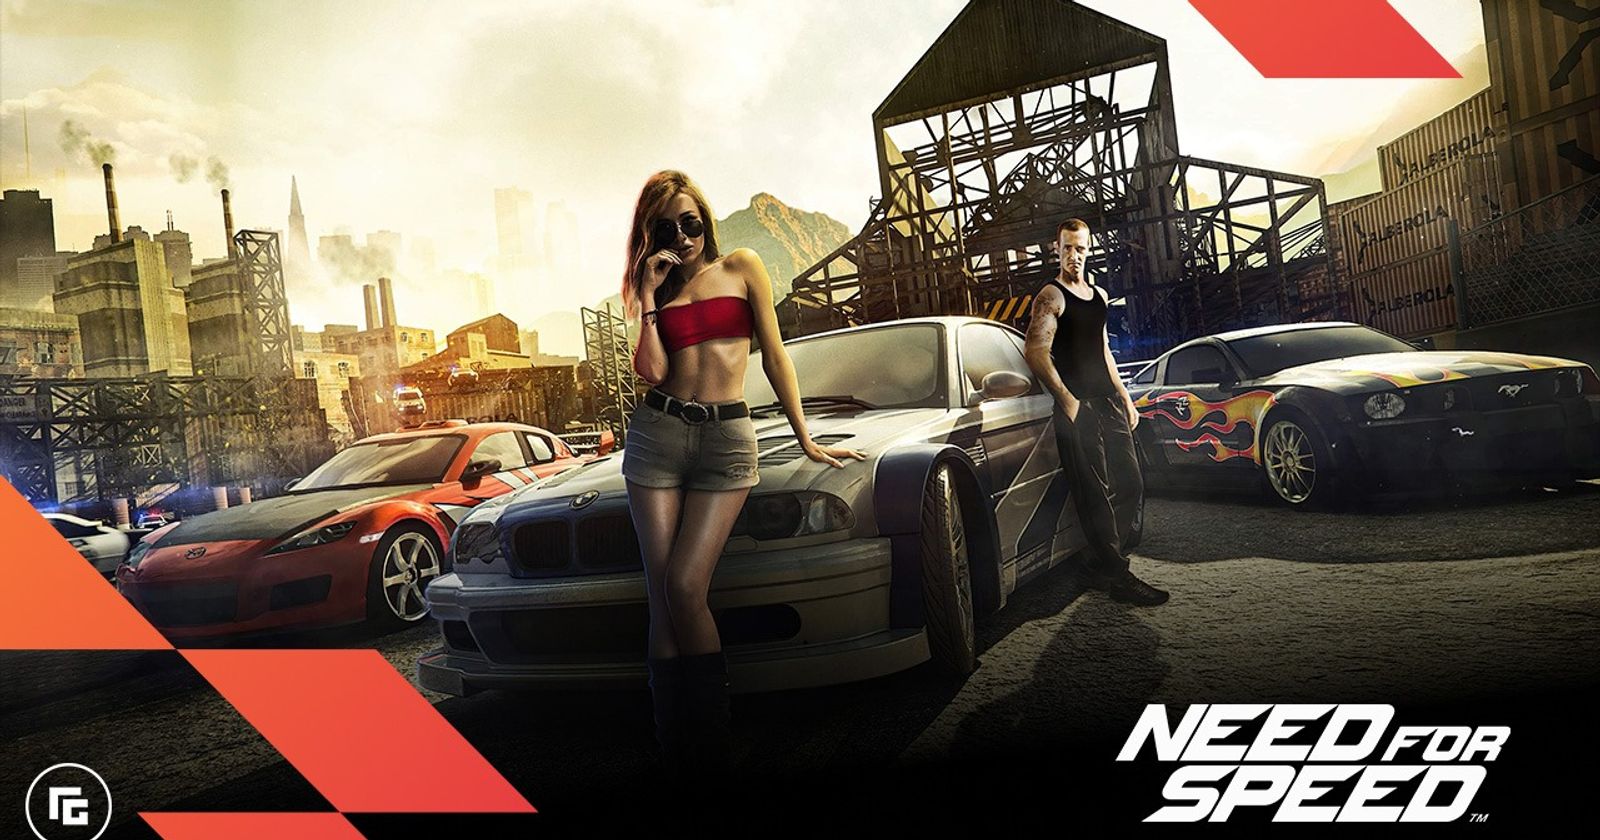 Need for Speed Payback Xbox One review: A famous name in need of